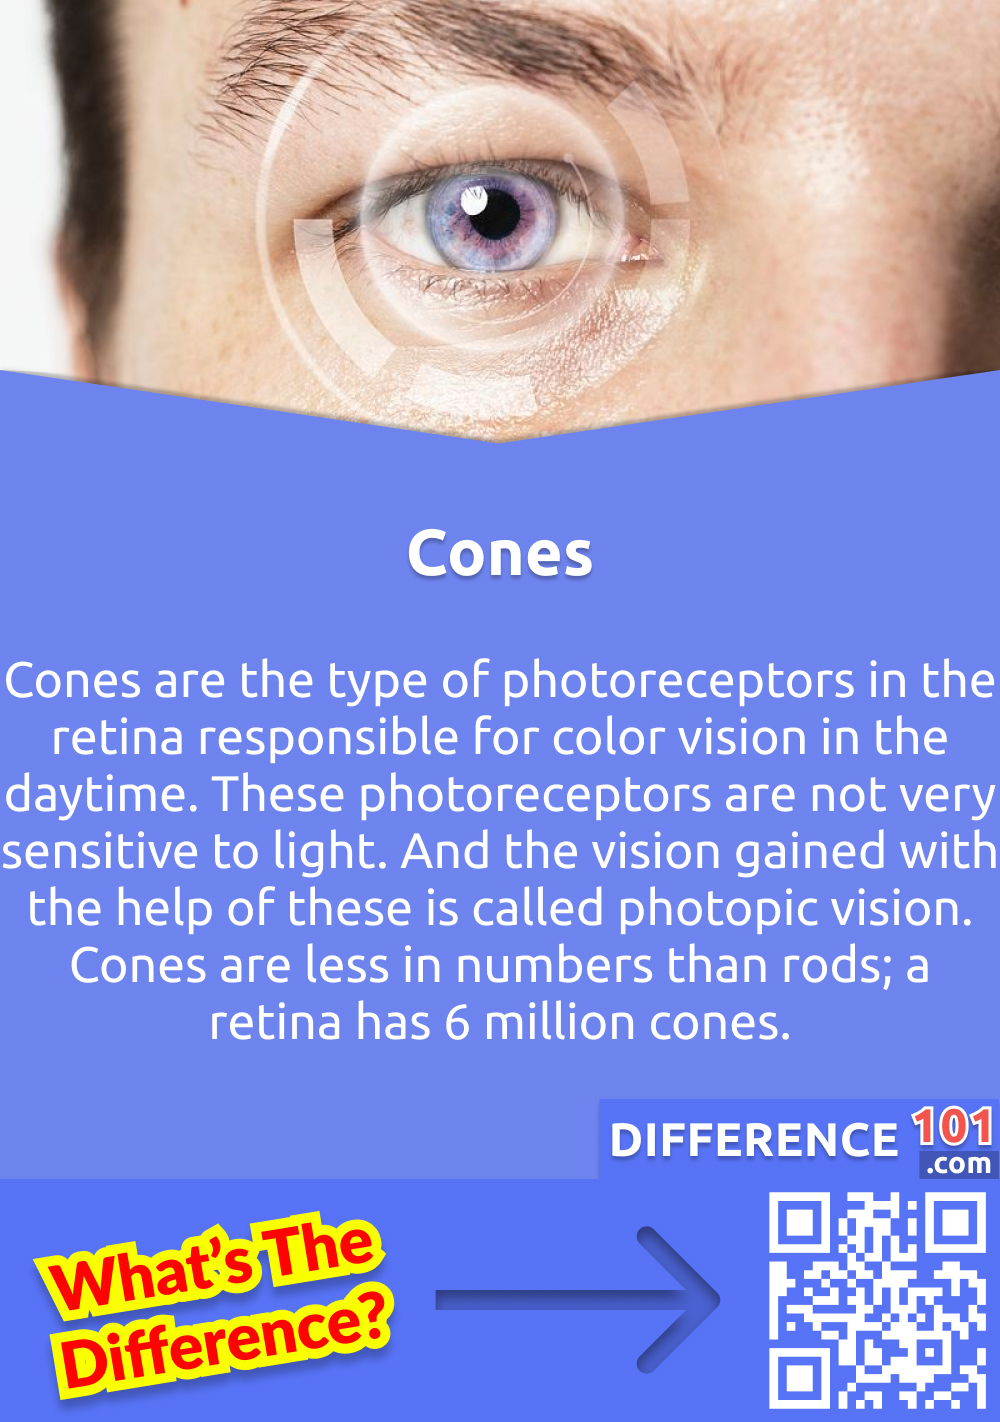 What Are Cones? Cones are the type of photoreceptors in the retina responsible for color vision in the daytime. These photoreceptors are not very sensitive to light. And the vision gained with the help of these is called photopic vision. Cones are less in numbers than rods; a retina has 6 million cones.